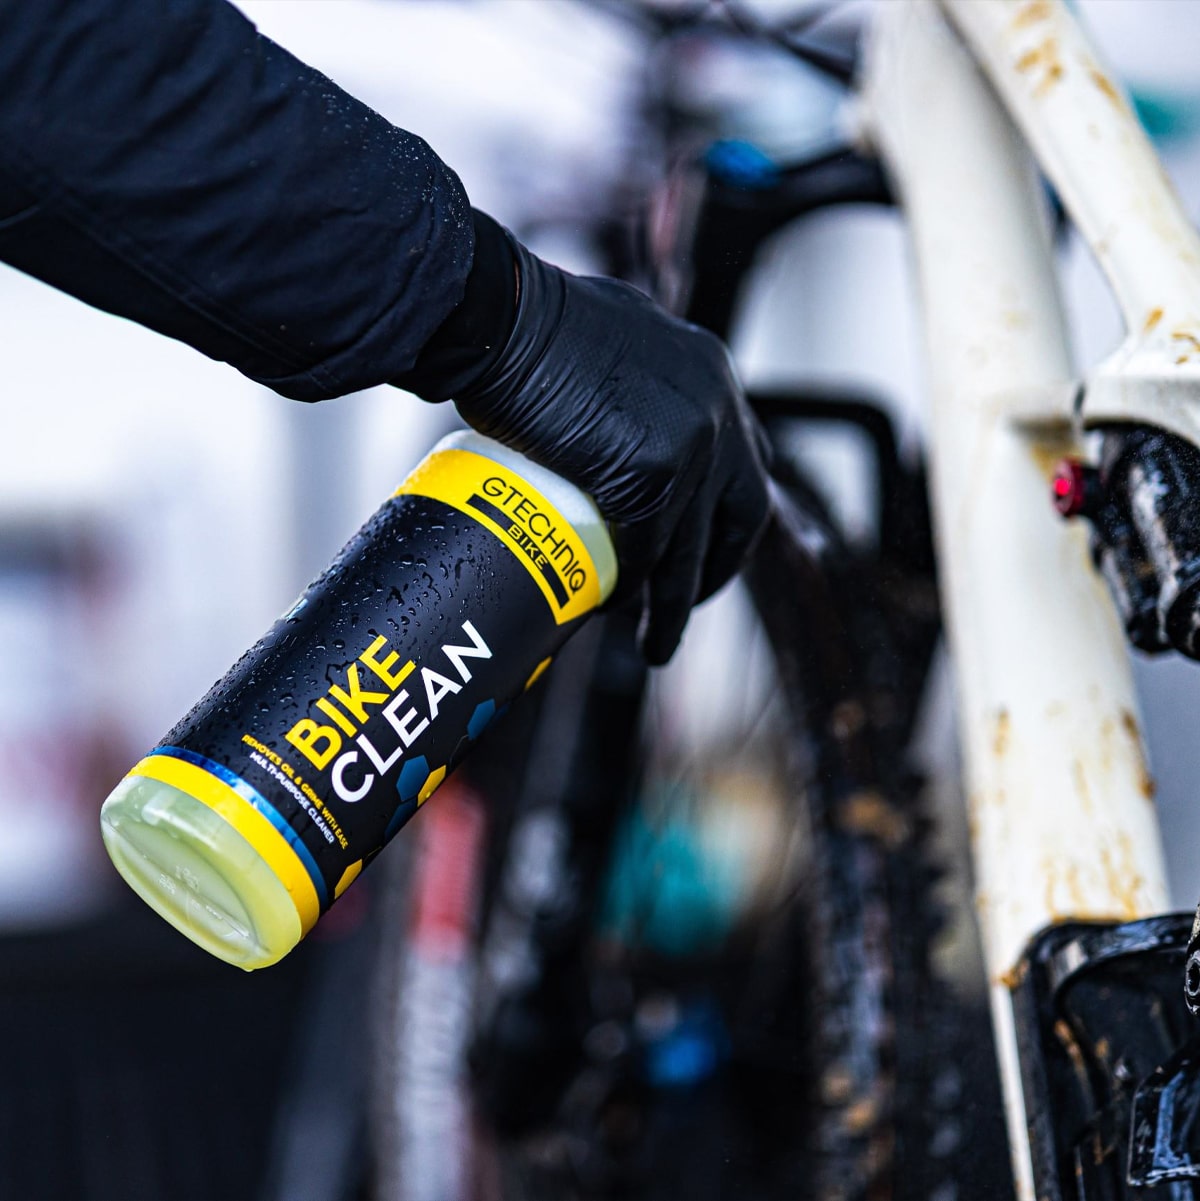 What’s the difference between Bike Clean and Bike Wash?